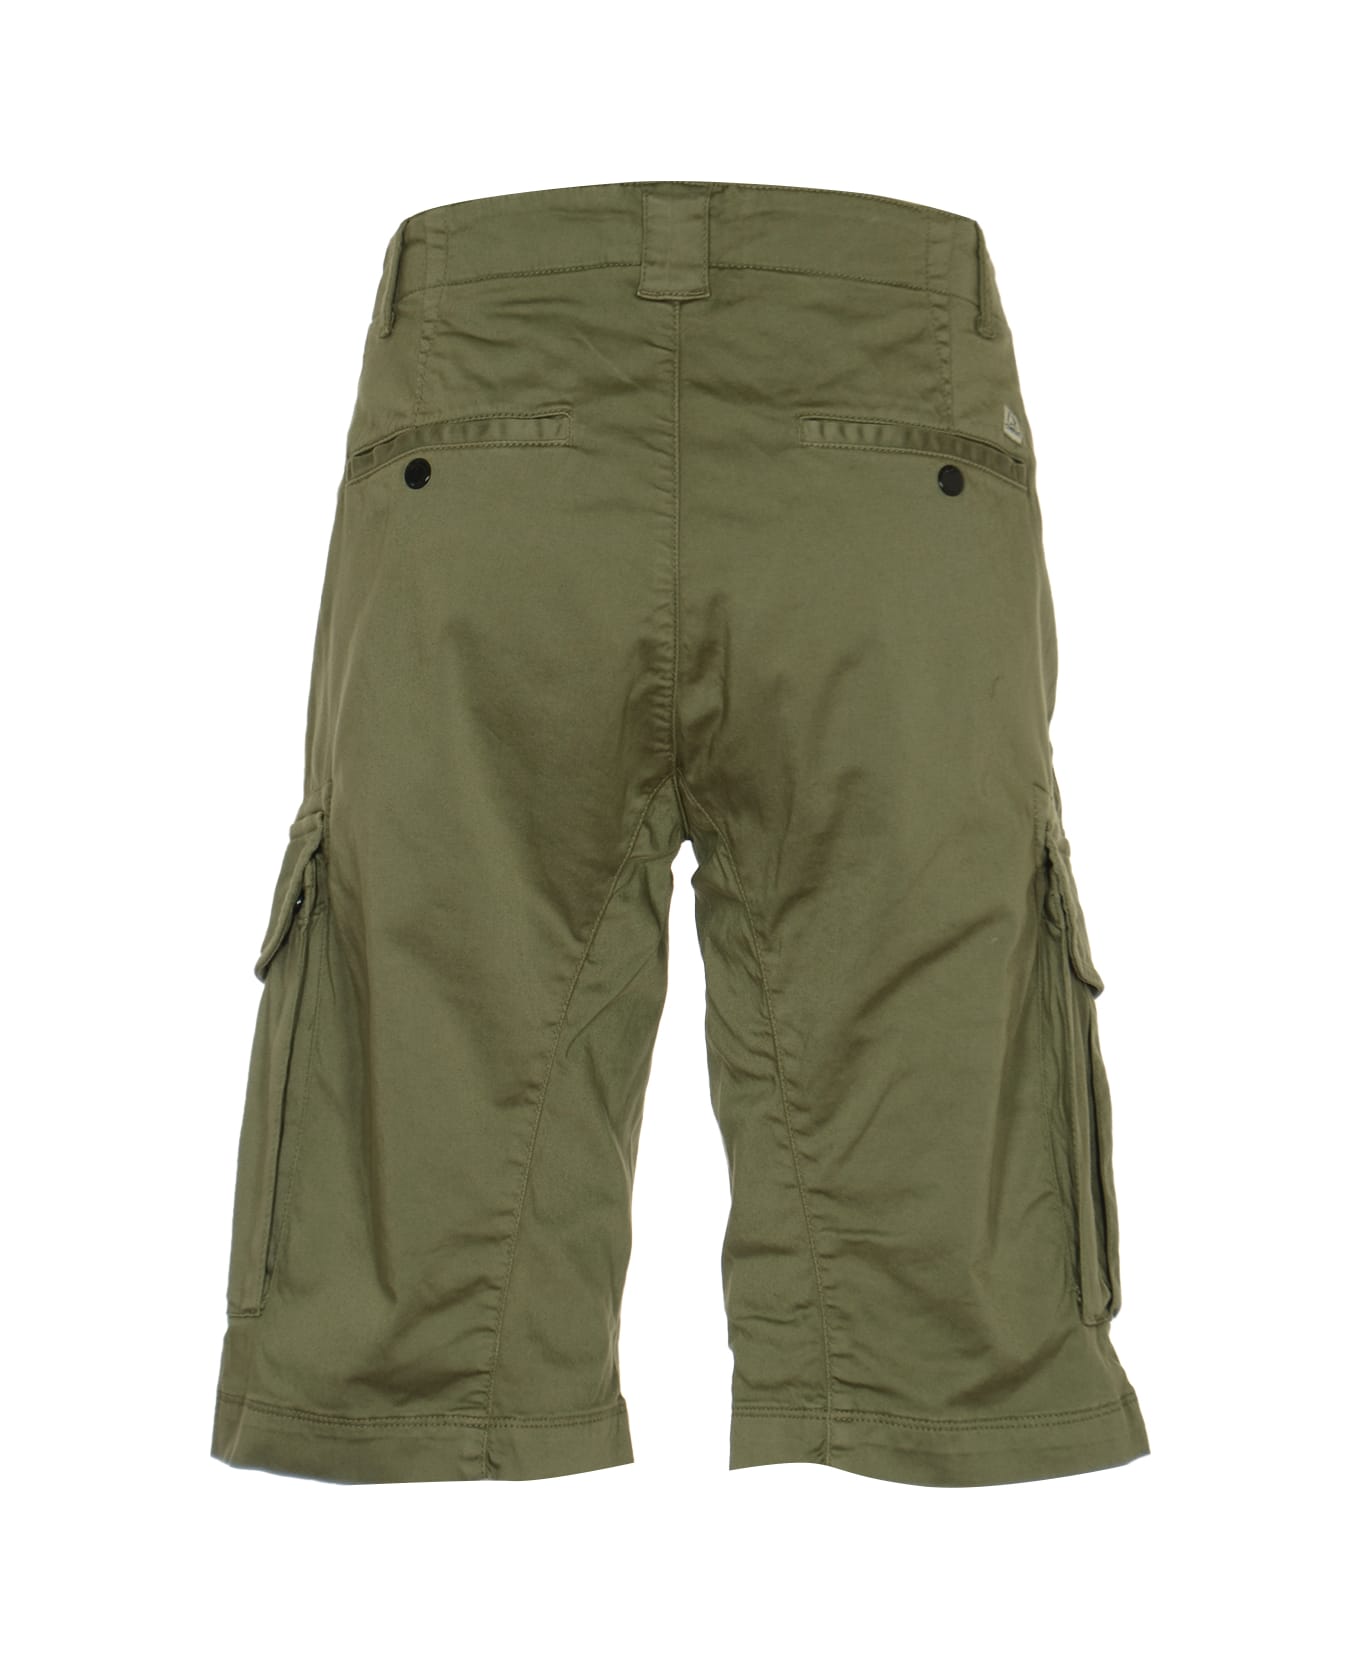 C.P. Company Lens-detailed Cargo Shorts - Agave Green